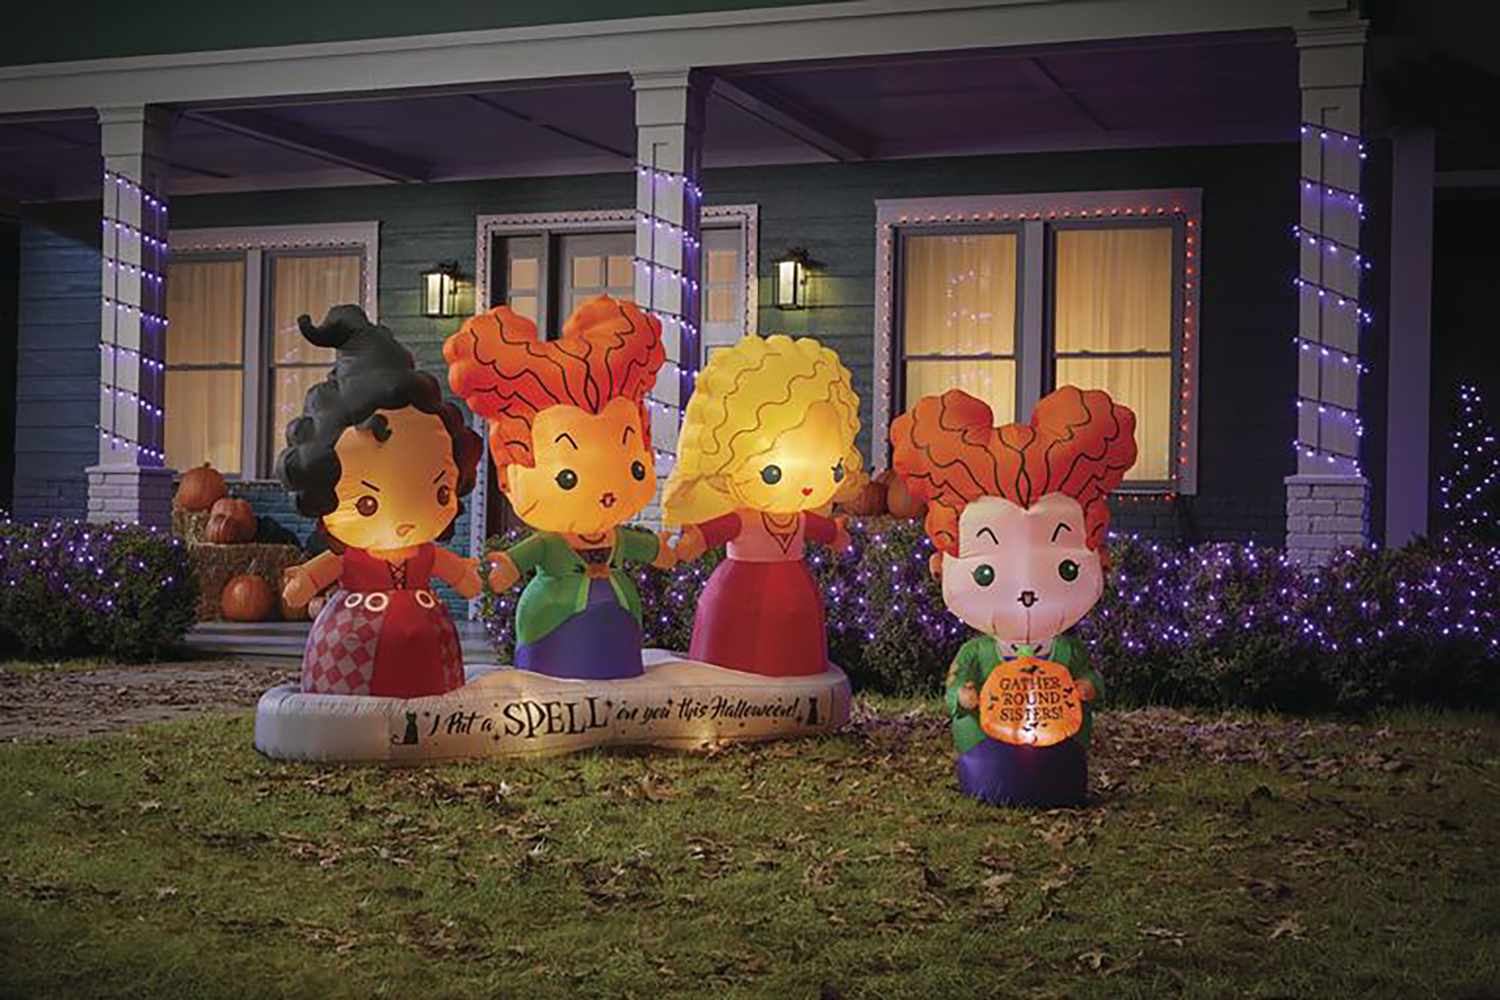 The Home Depot Is Selling Hocus Pocus-Themed Lawn Inflatables Ahead of Halloween and Film's Sequel